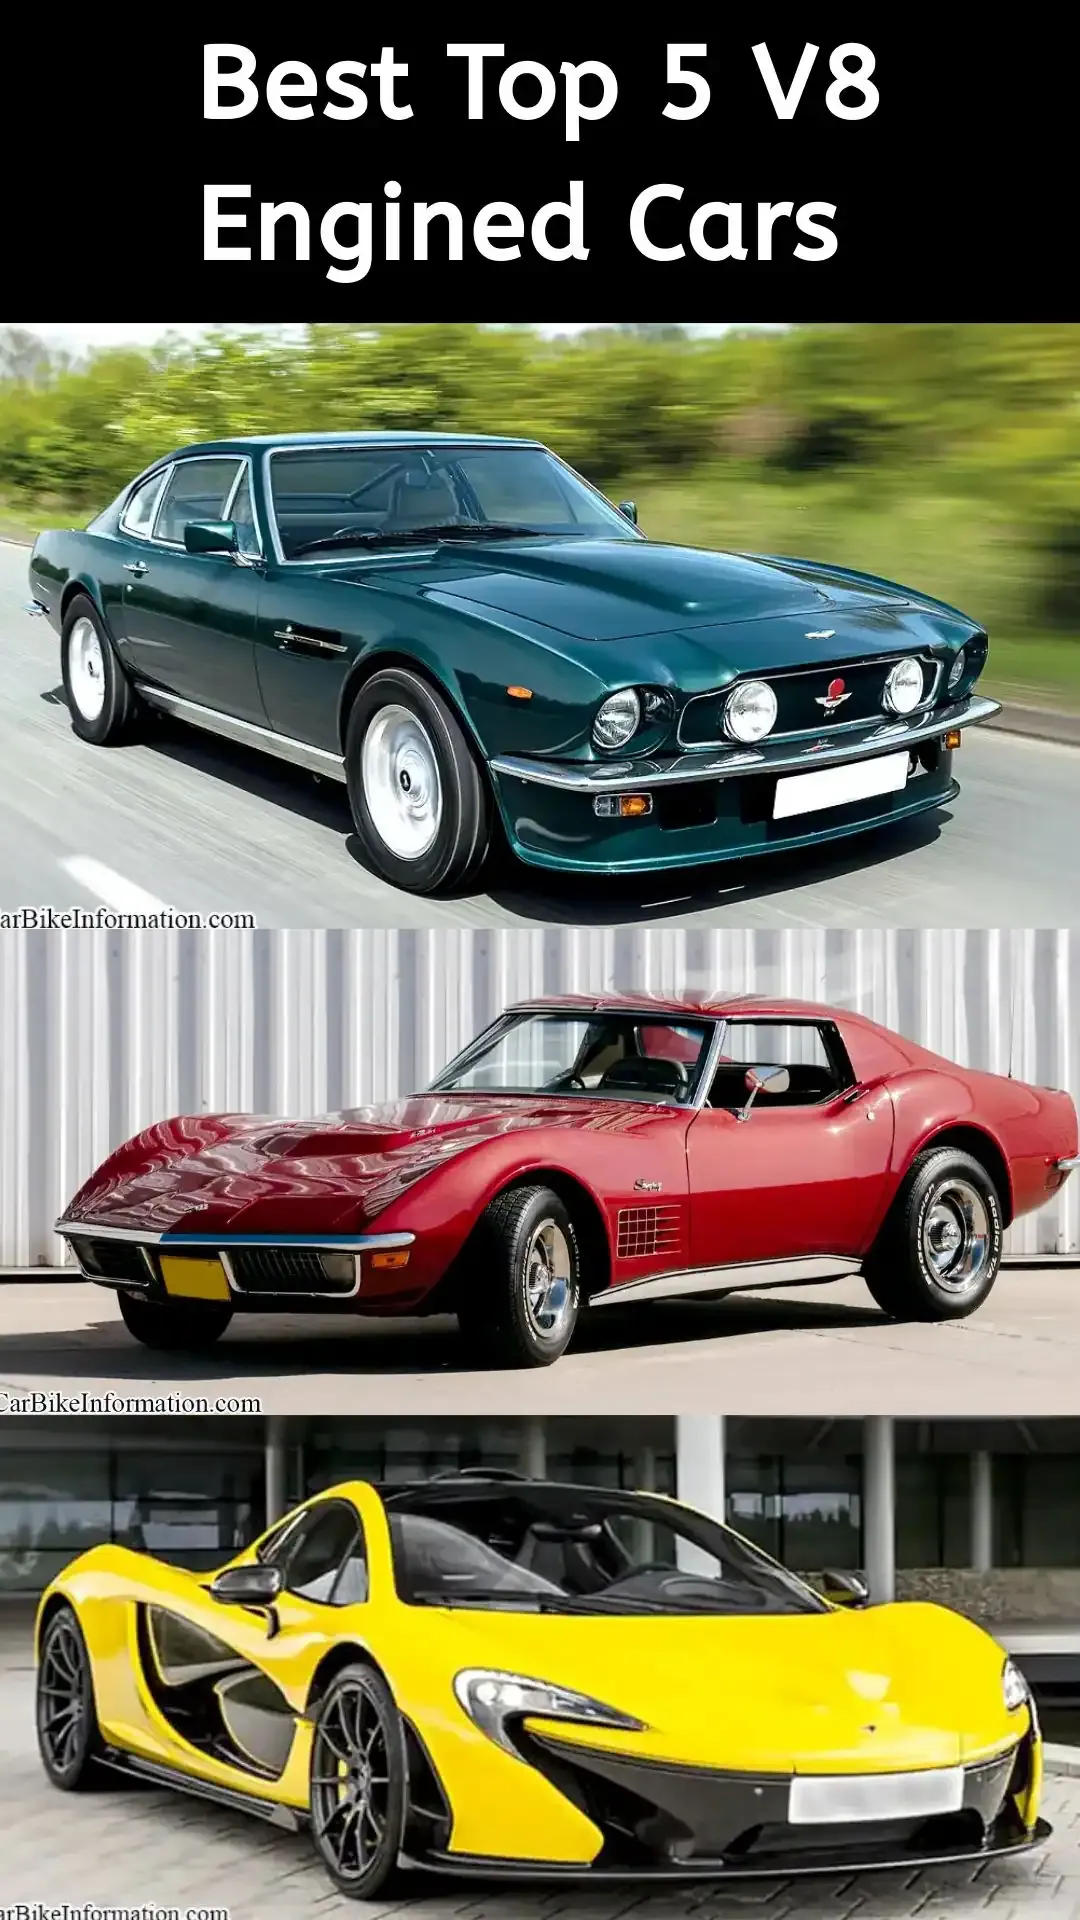 Best Top 5 V8 Engined Cars